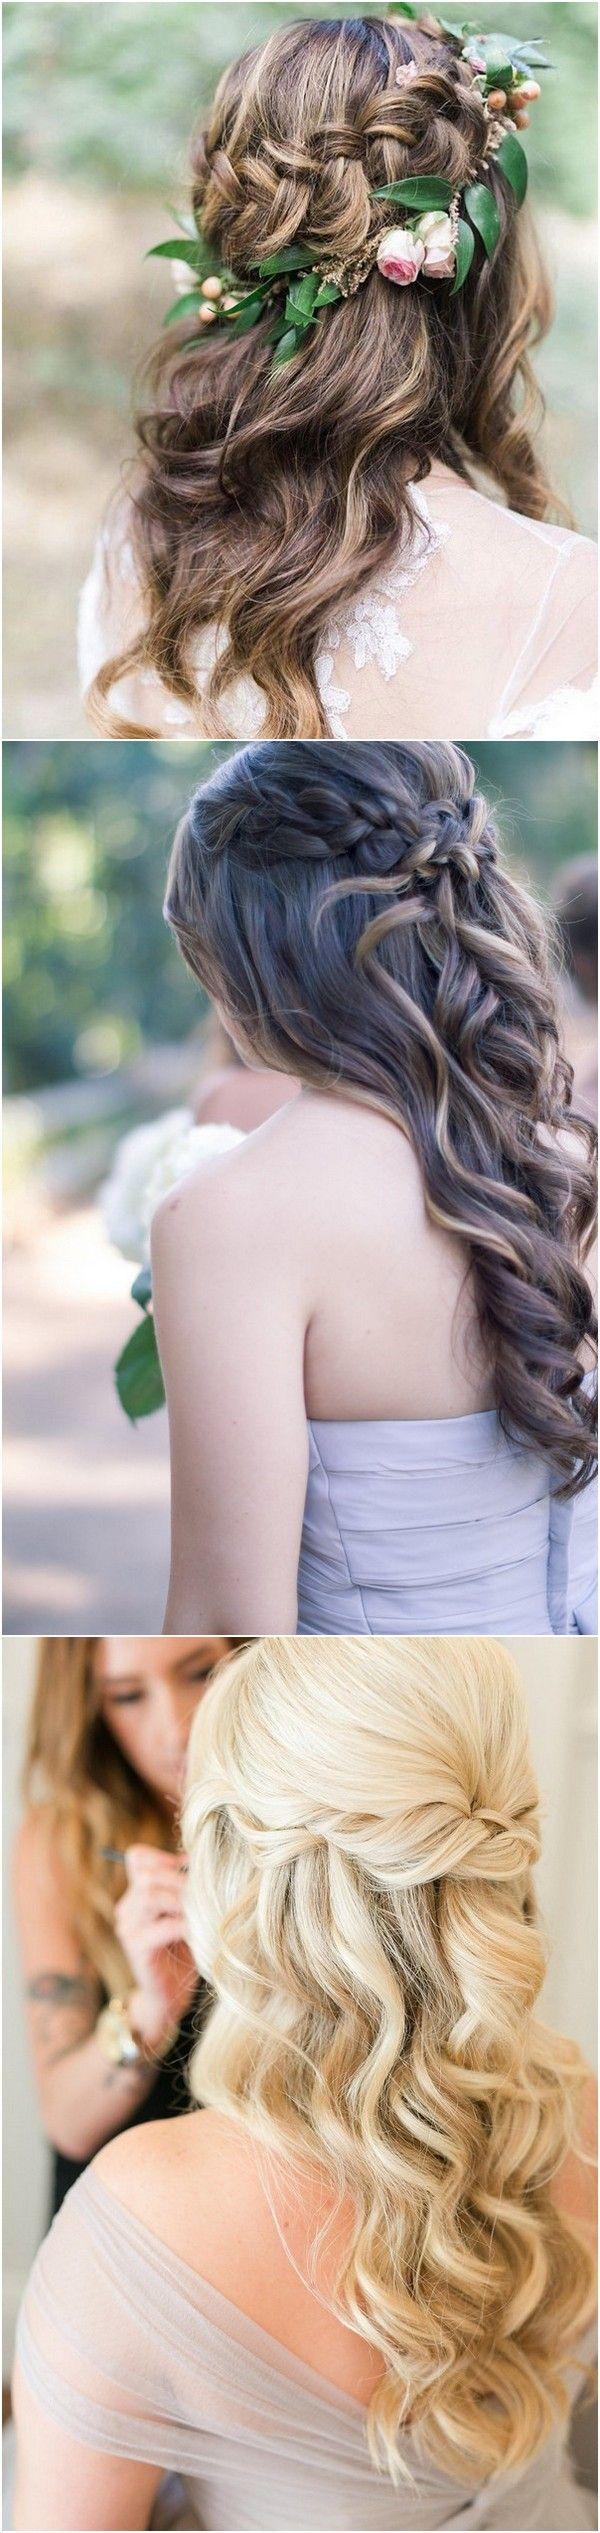 Wedding - 10 Glamorous Half Up Half Down Wedding Hairstyles From Hair And Makeup Girl